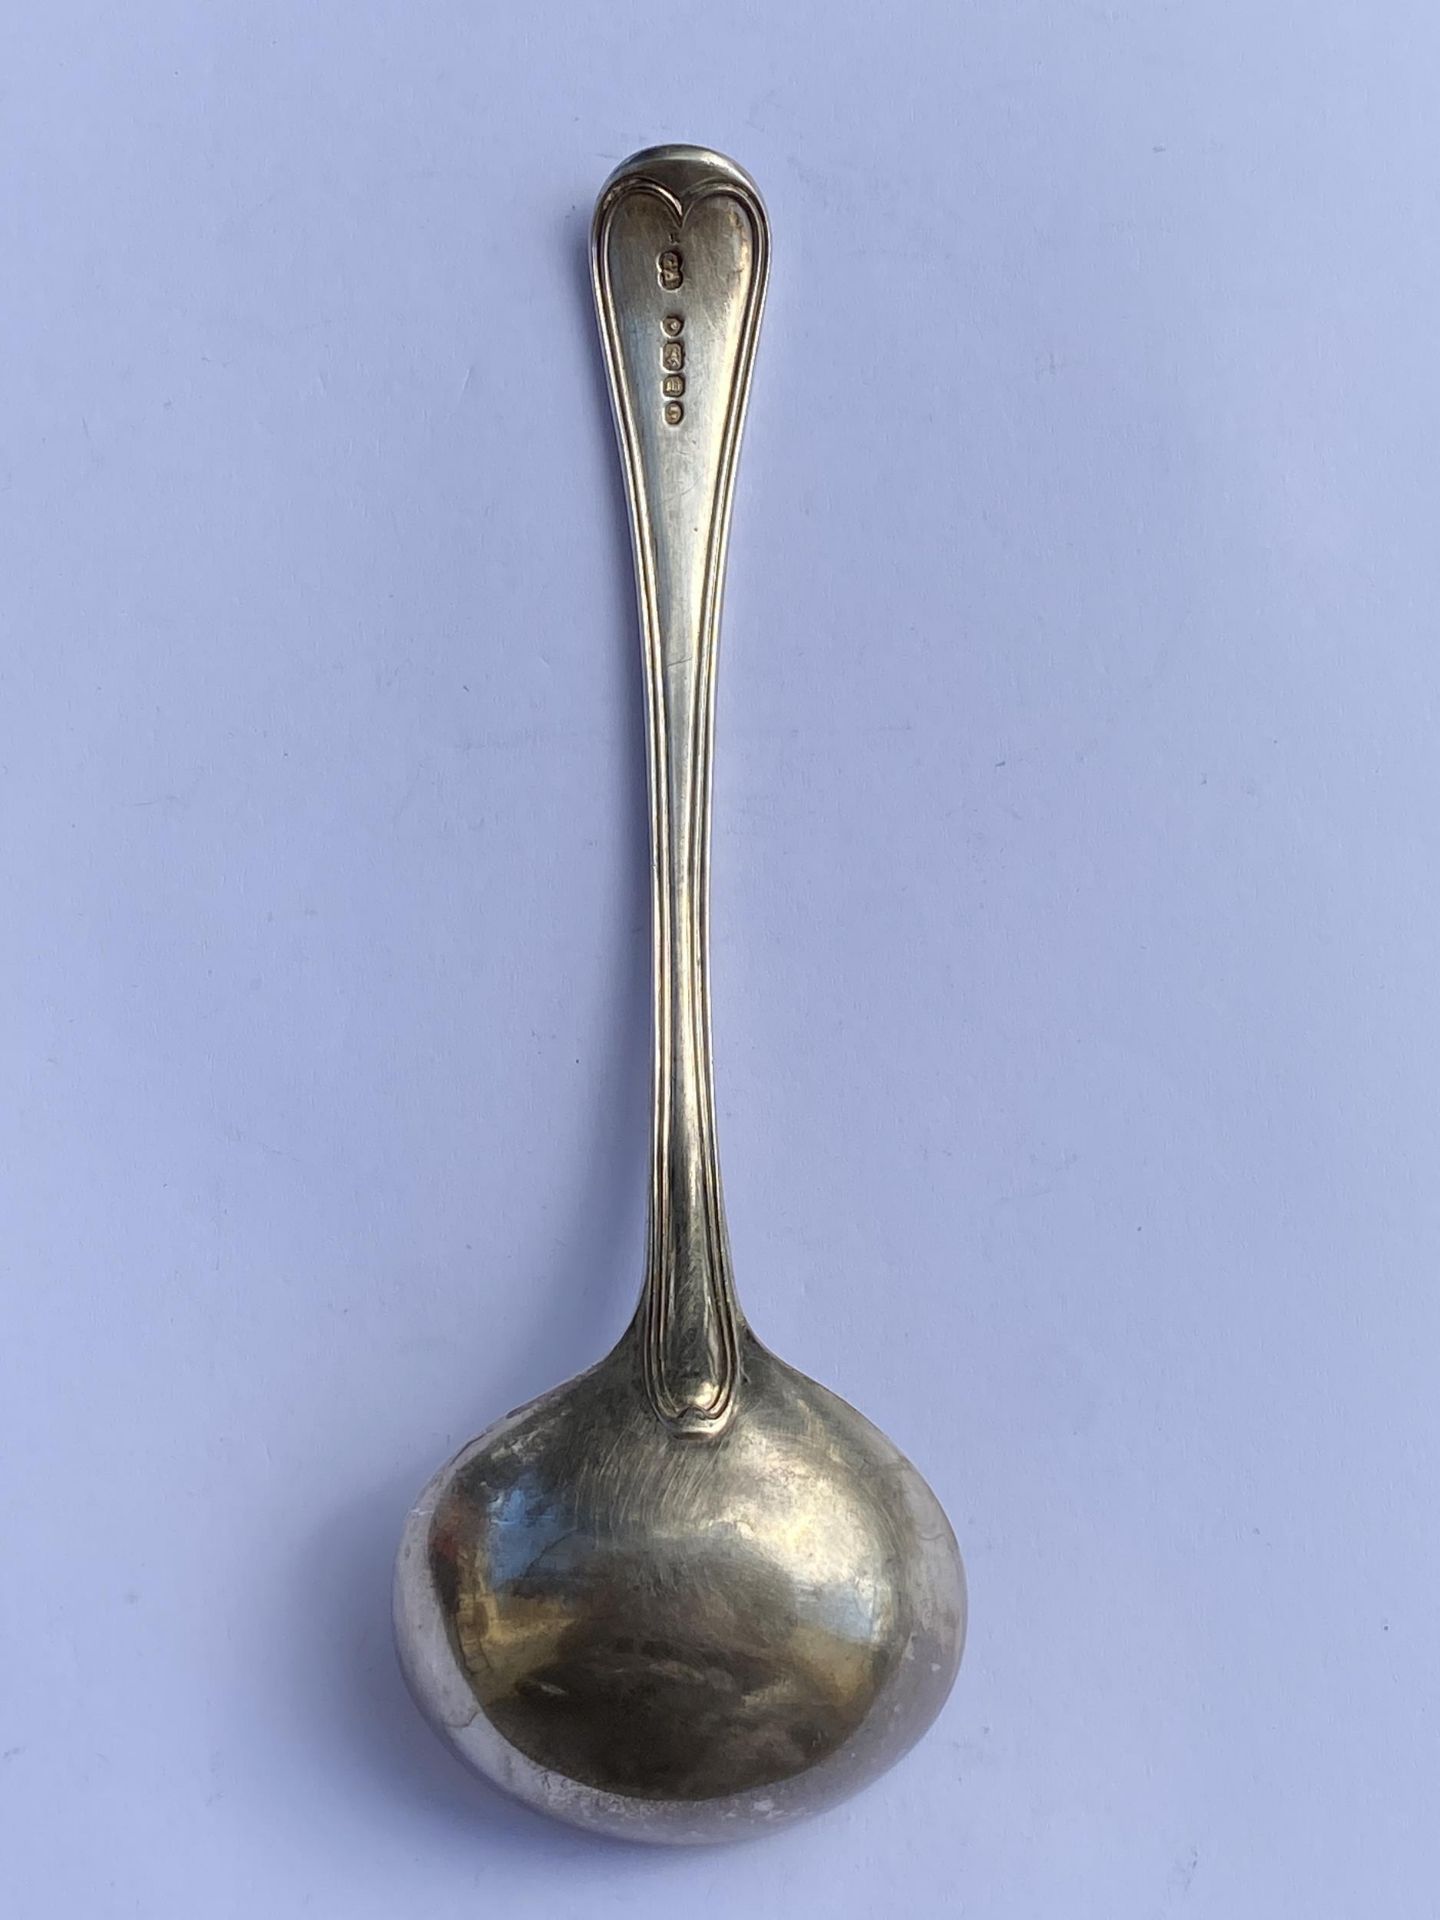 A VICTORIAN 1847 HALLMARKED LONDON SILVER LADLE, MAKER CHAWNER & CO, LENGTH 17 CM, WEIGHT 70 GRAMS - Image 3 of 4